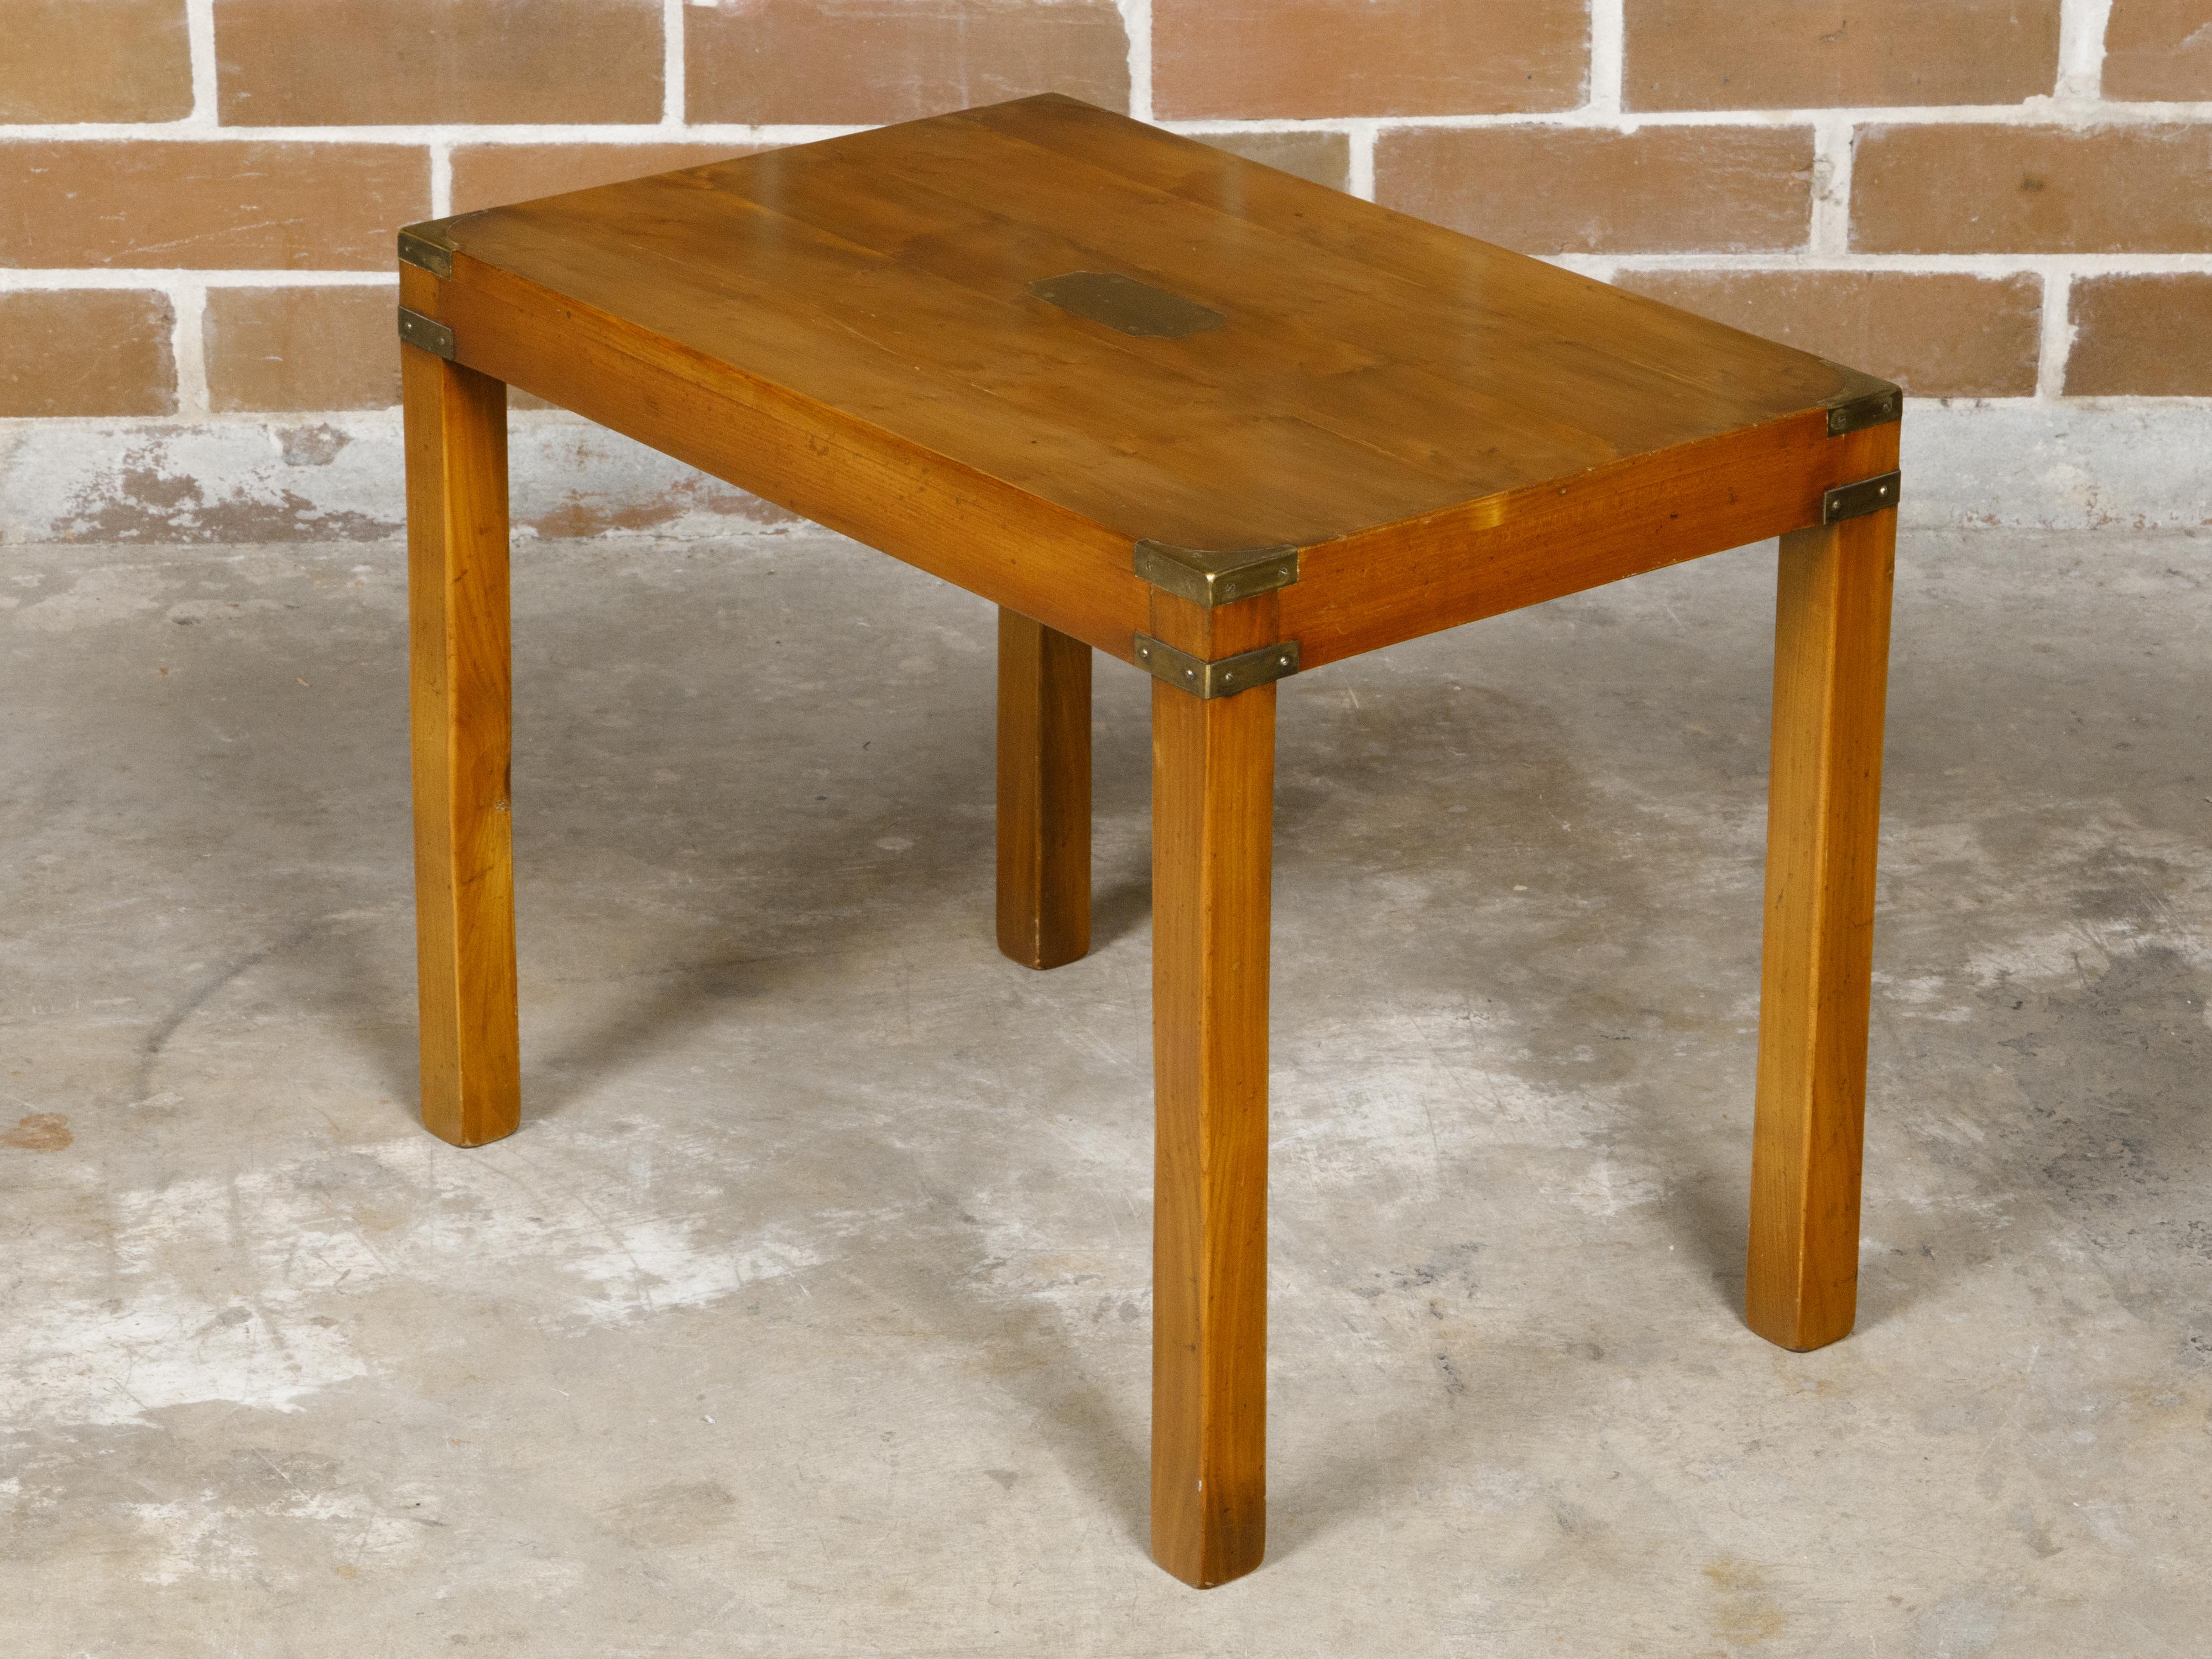 English Campaign Yew Wood 1920s Side Table with Brass Accents and Straight Legs For Sale 8